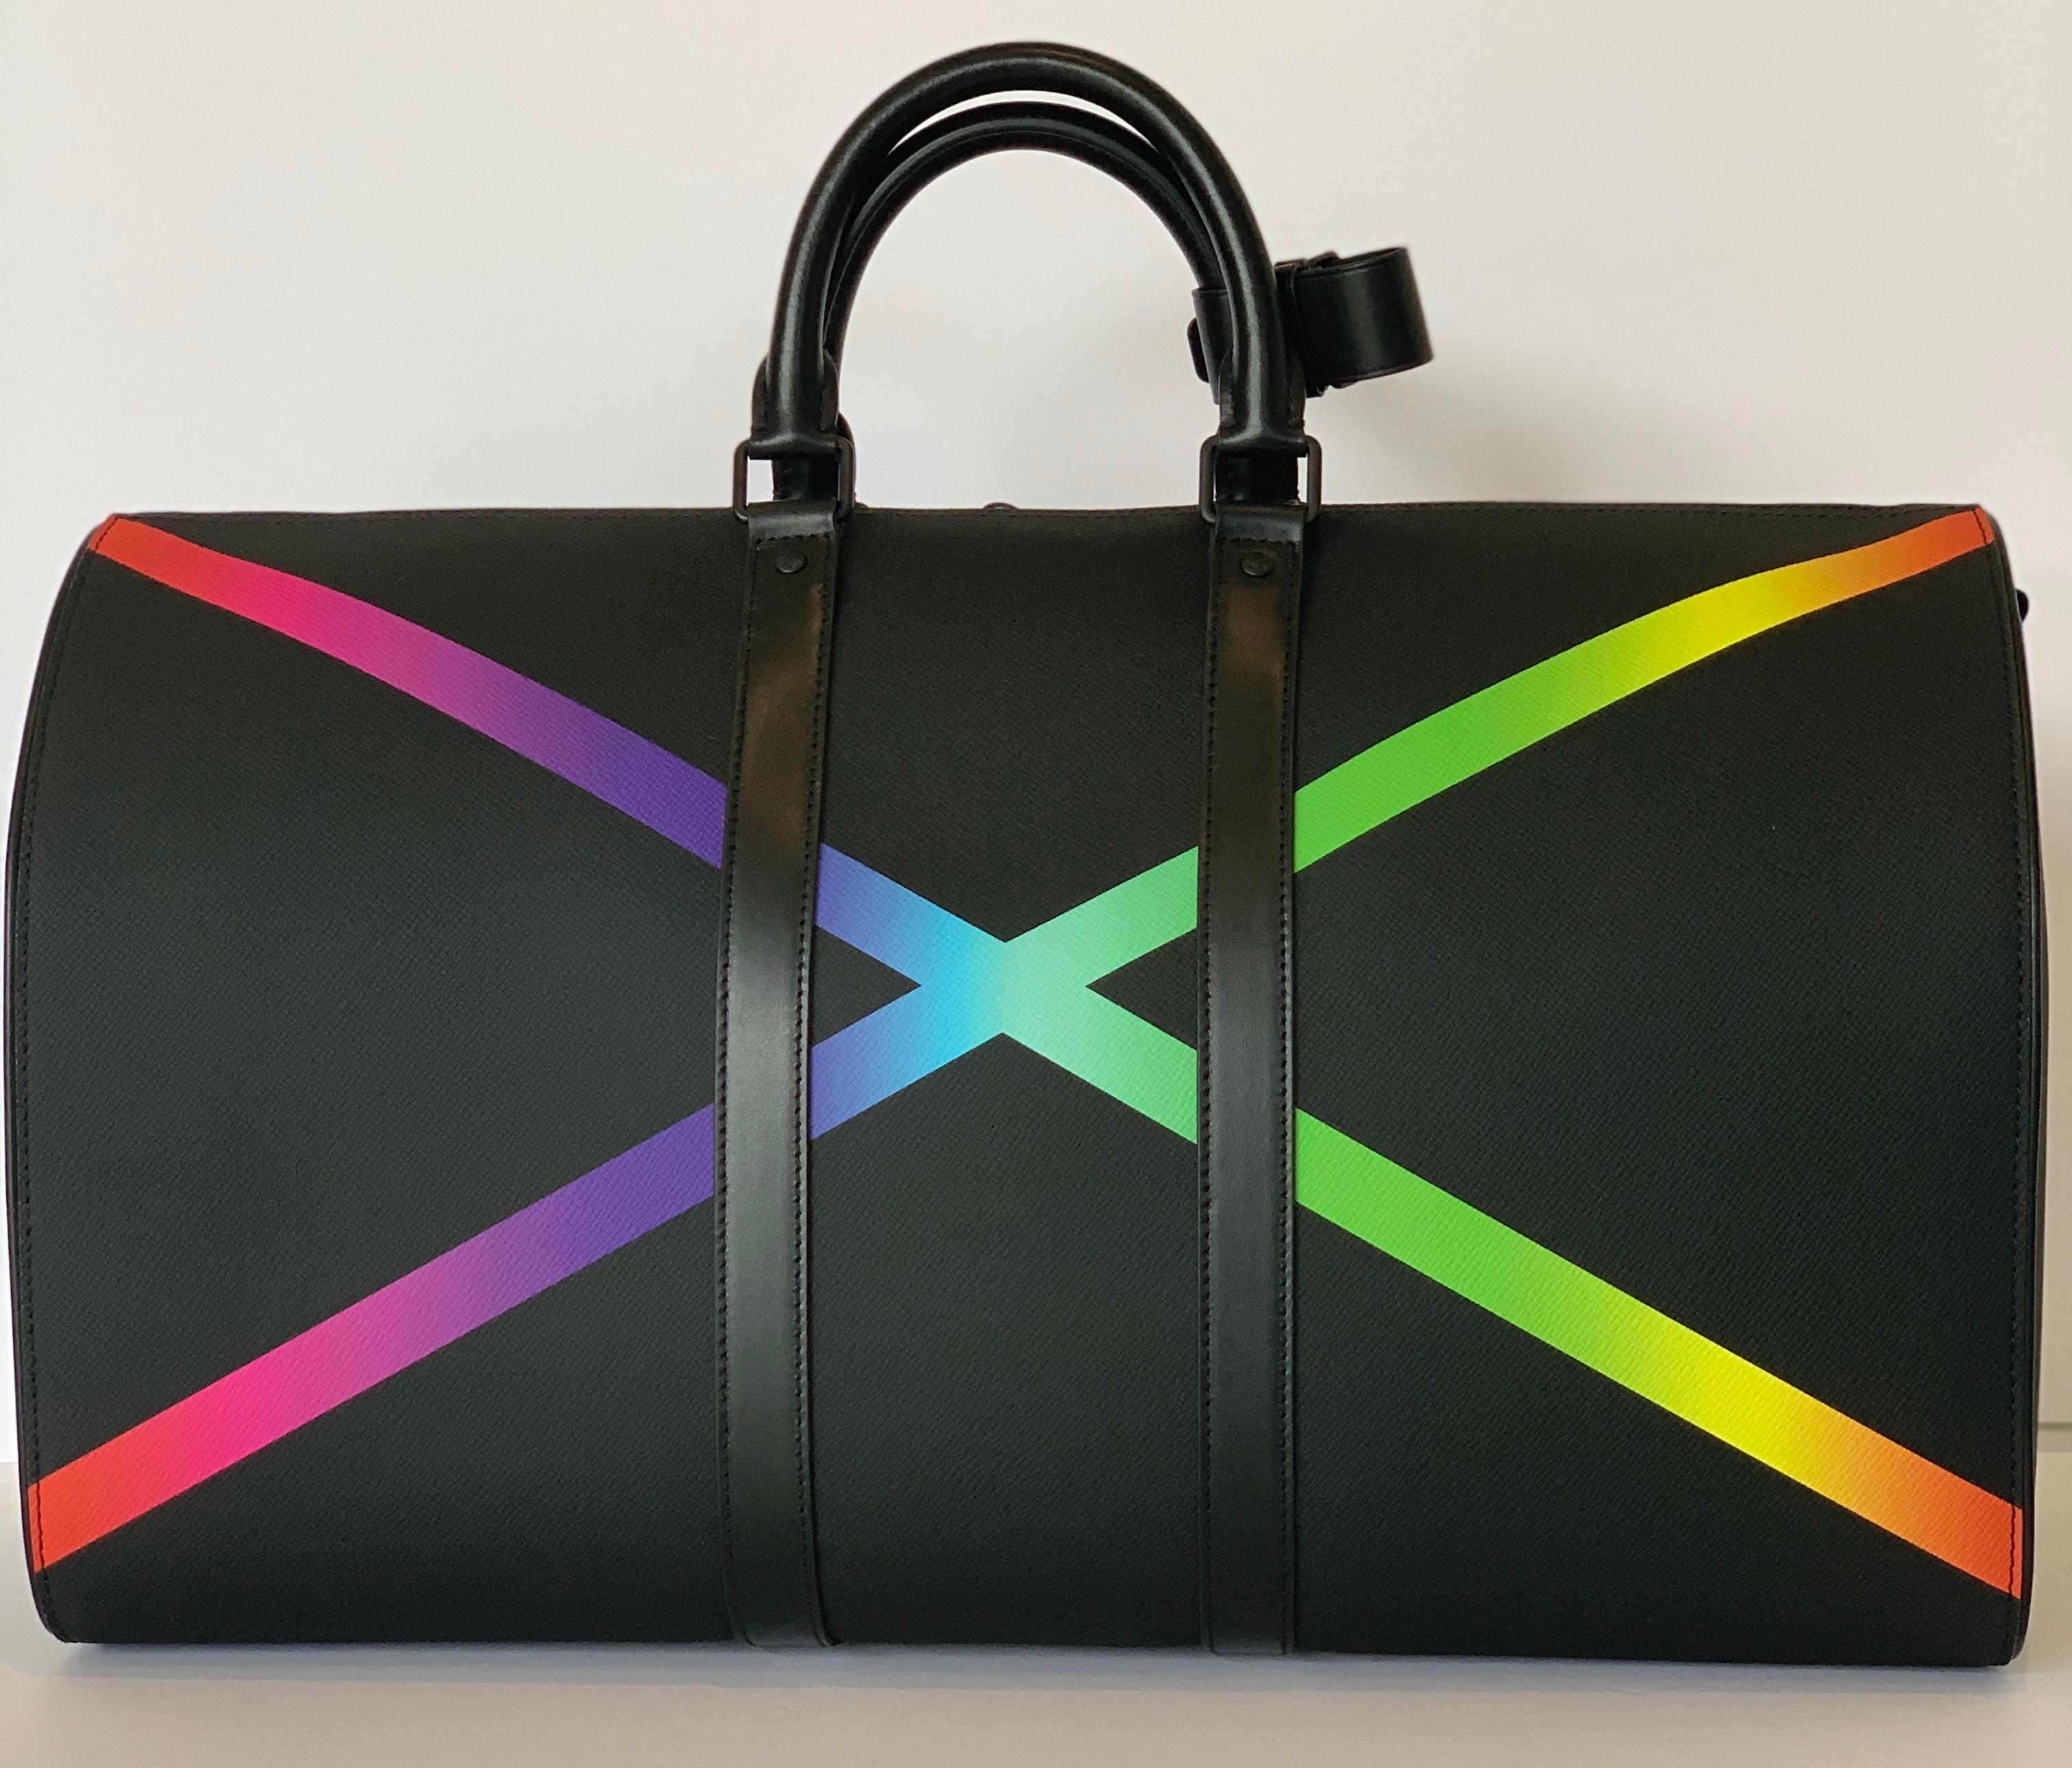 From the Virgil Abloh Collection
2019
Fashioned from mat-black Taiga leather with a soft, almost rubbery feel, the Keepall Bandoulière 50 sports a radiant “X” in rainbow colors, the visual signature for the collection from Men’s Artistic Director